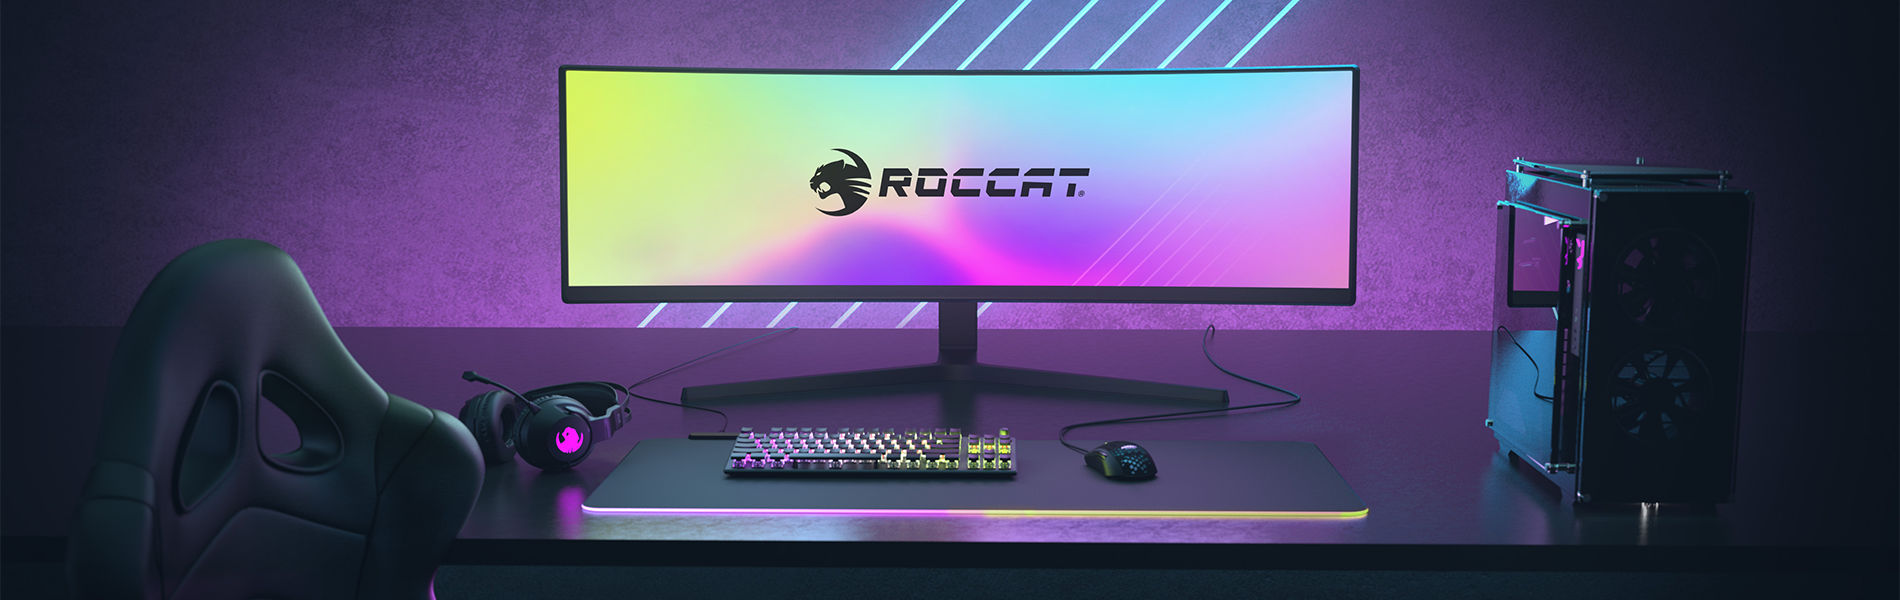 Roccat keyboard and mouse